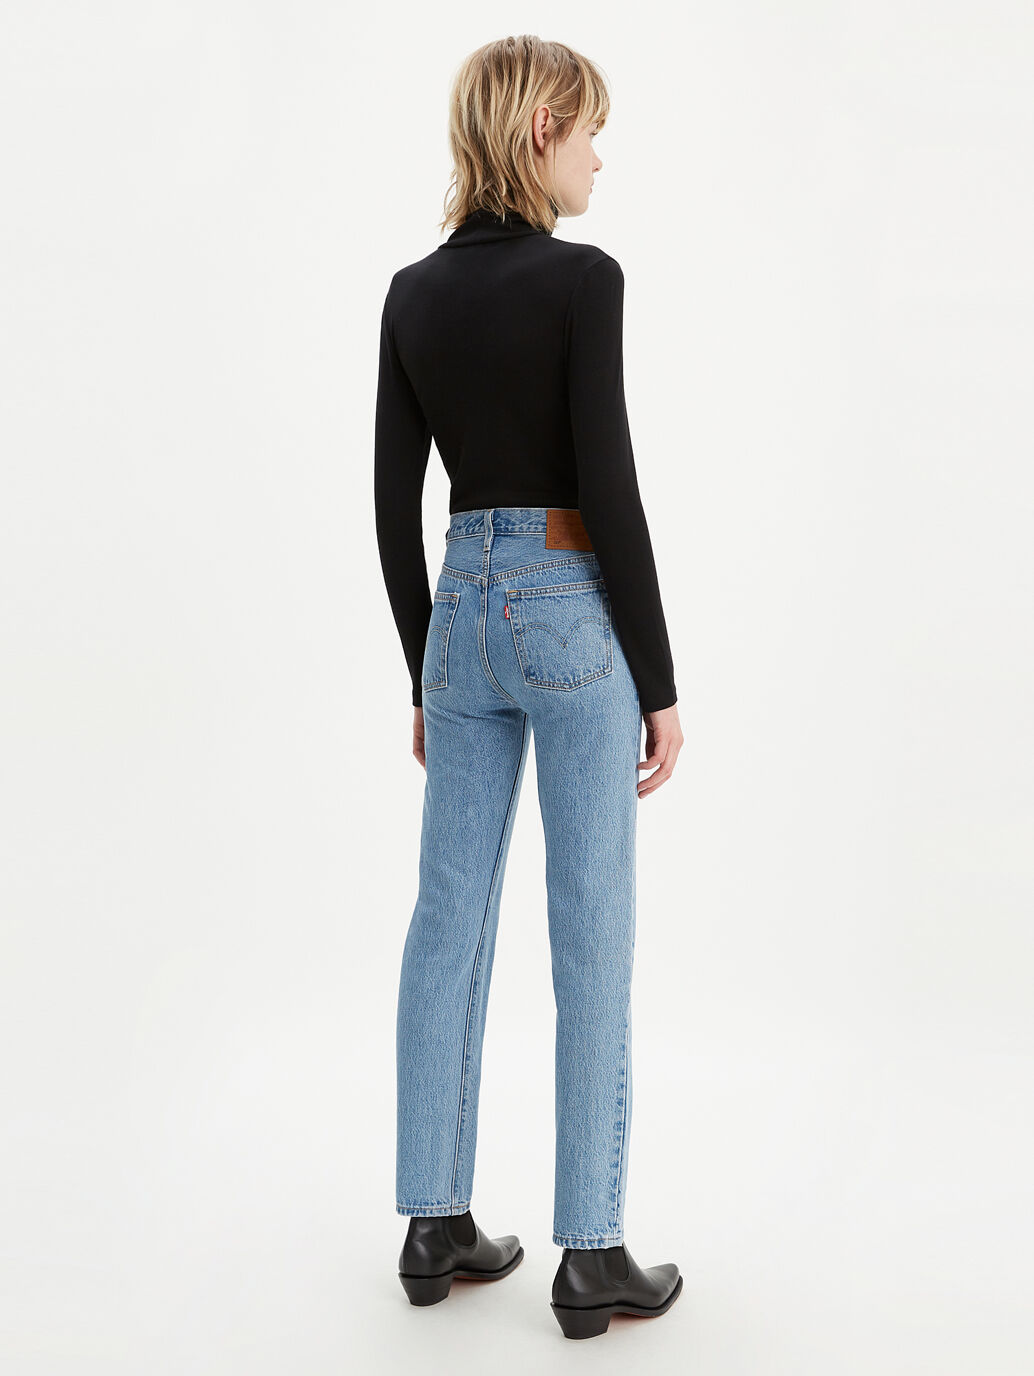 levis high waisted women's jeans